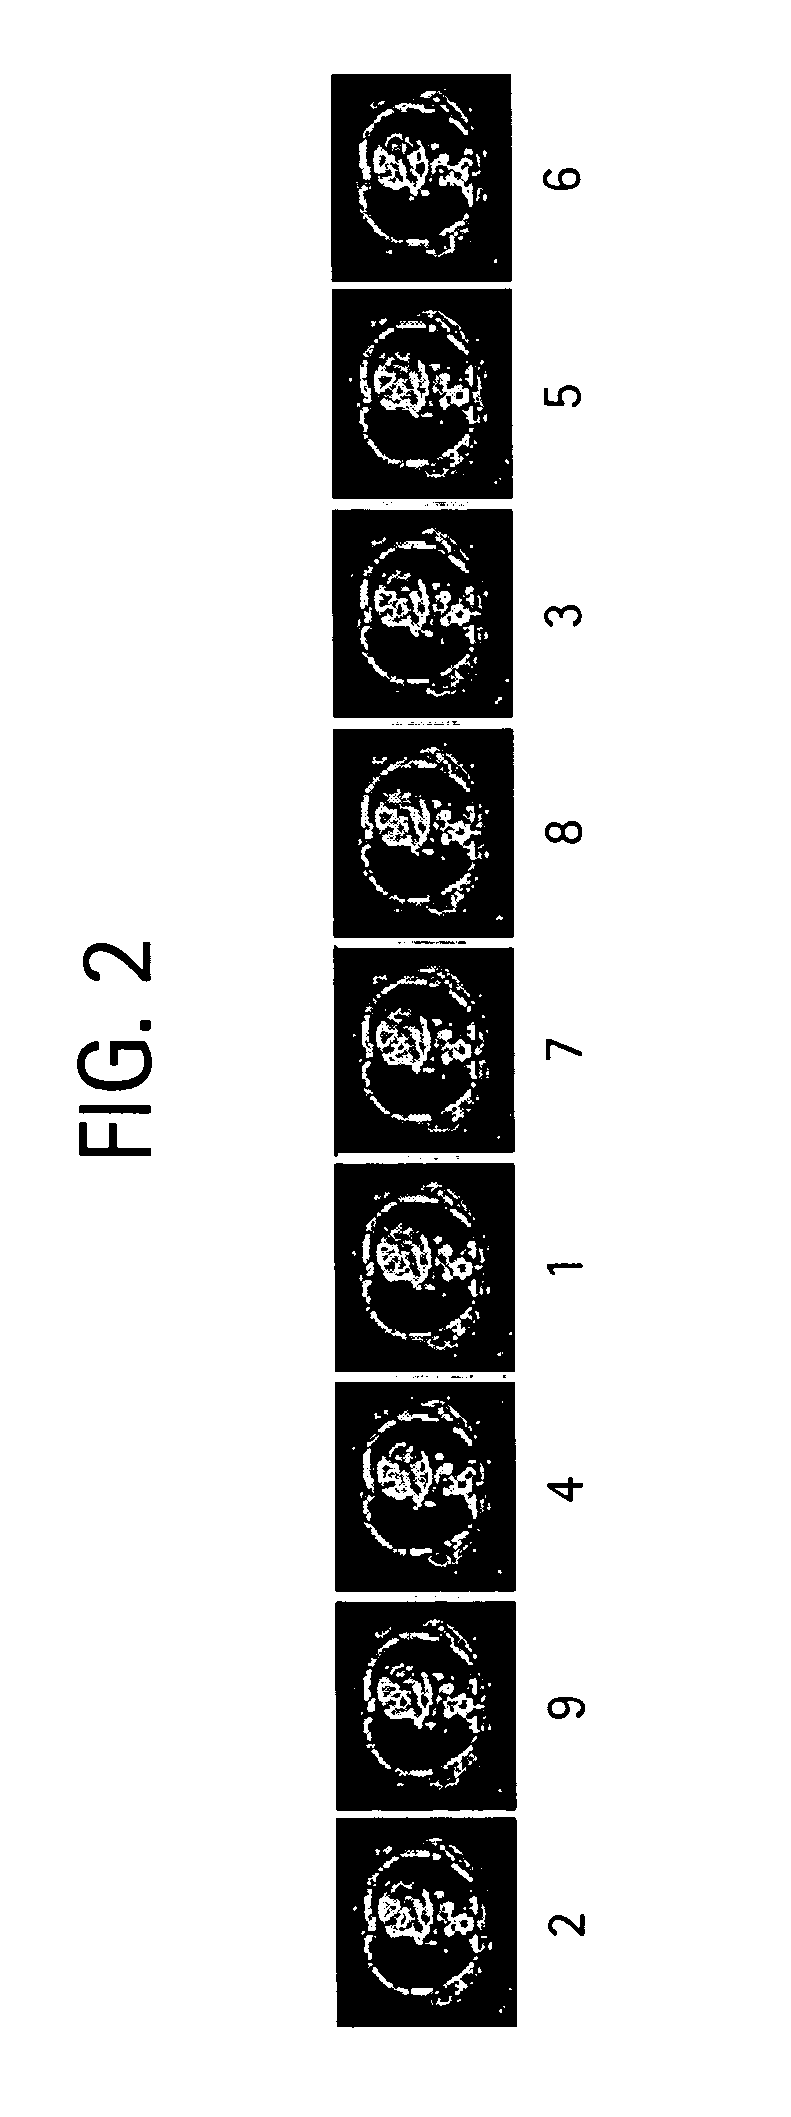 System and method for displaying images on a PACS workstation based on level of significance